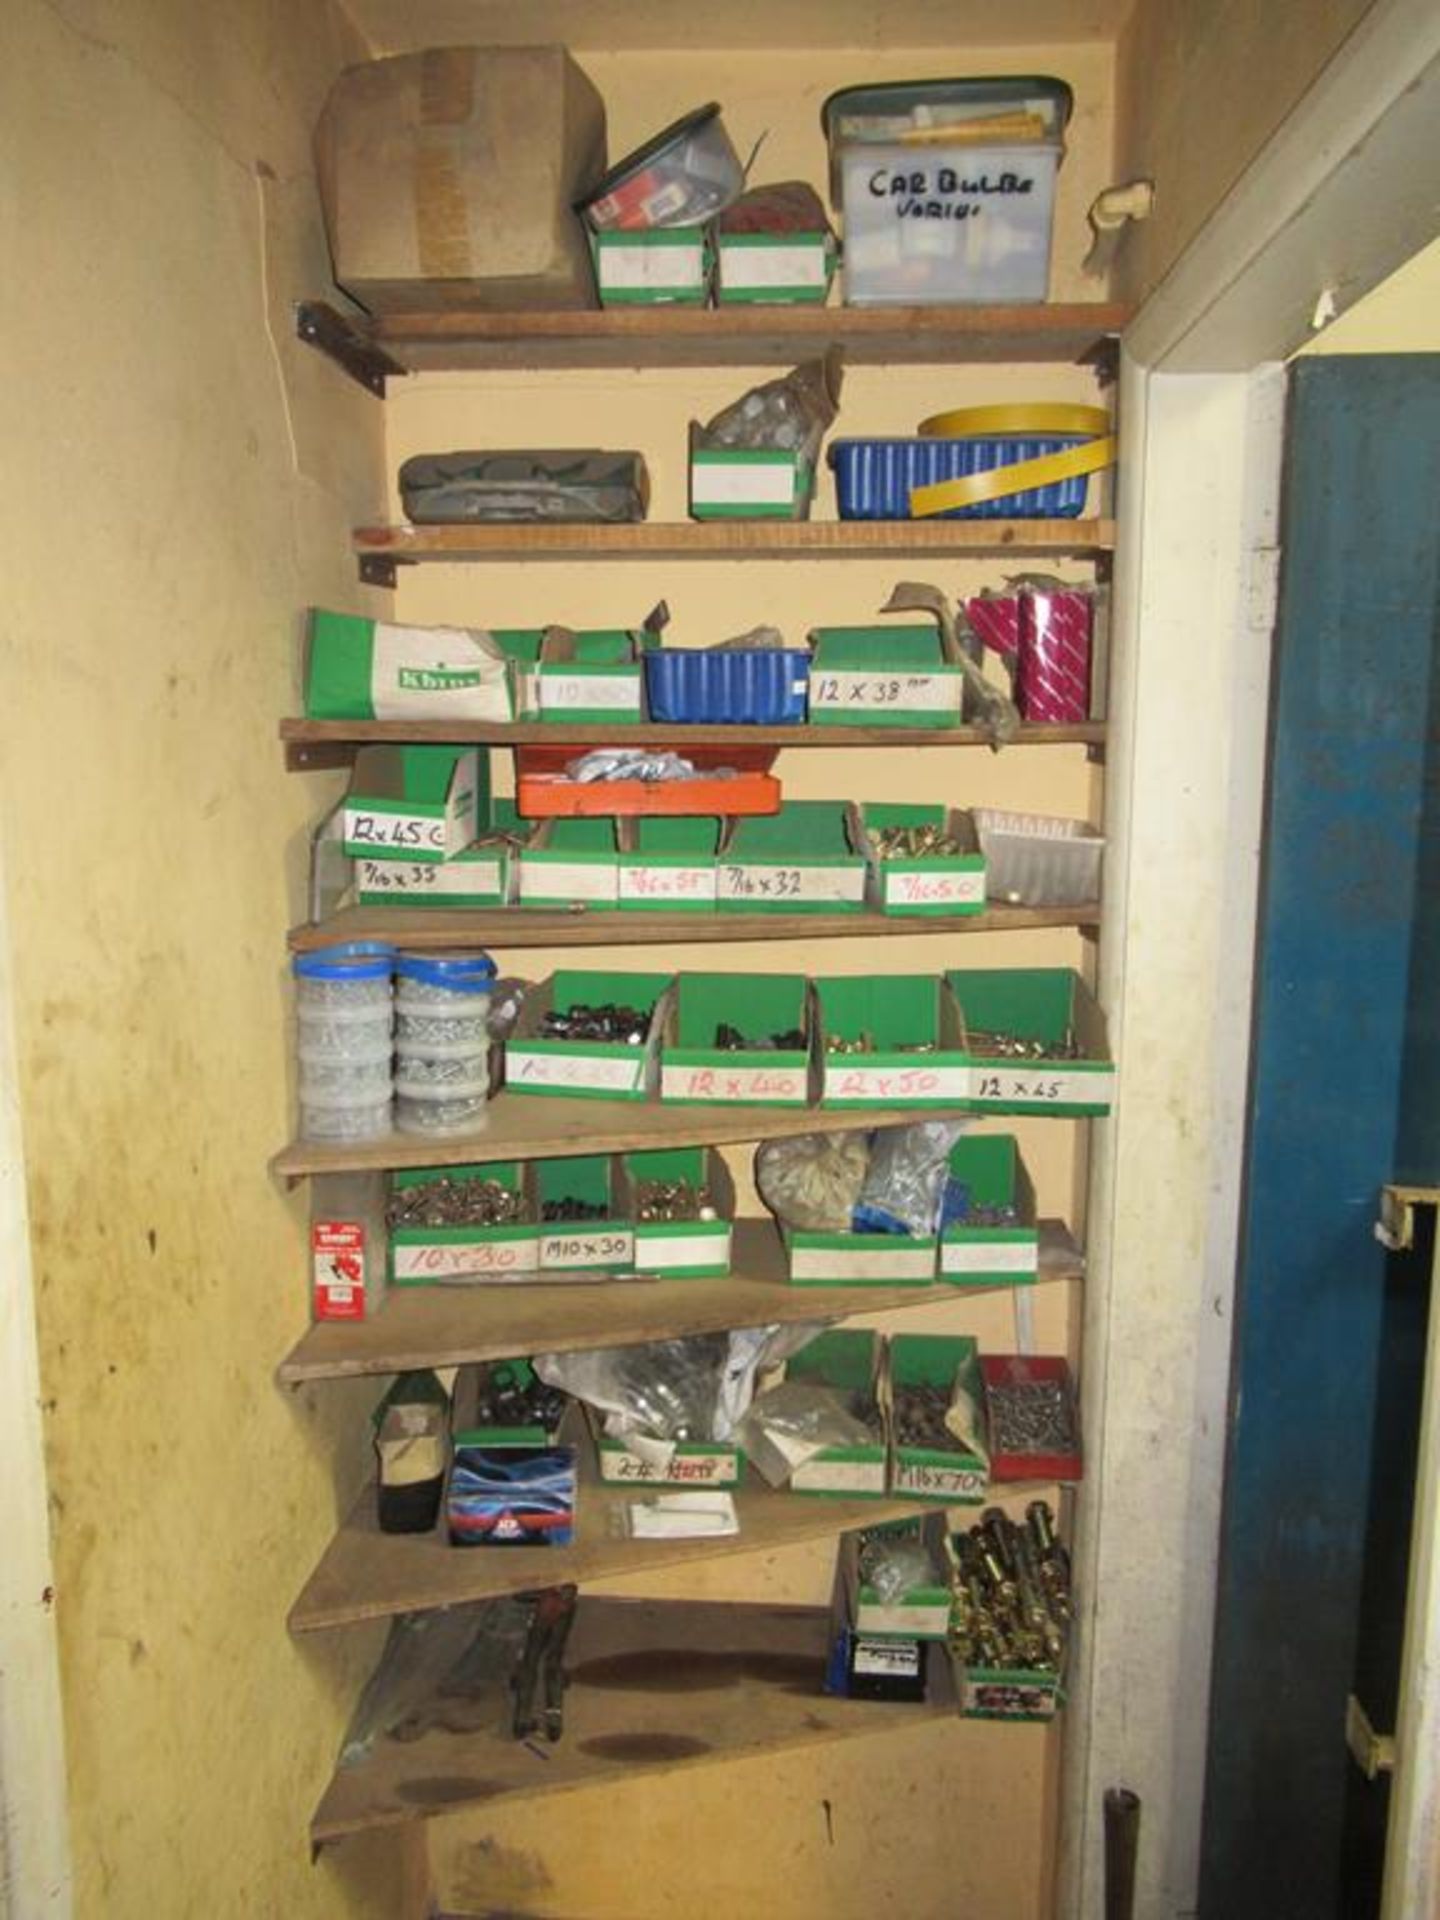 Contents of spares/store room - Image 6 of 6